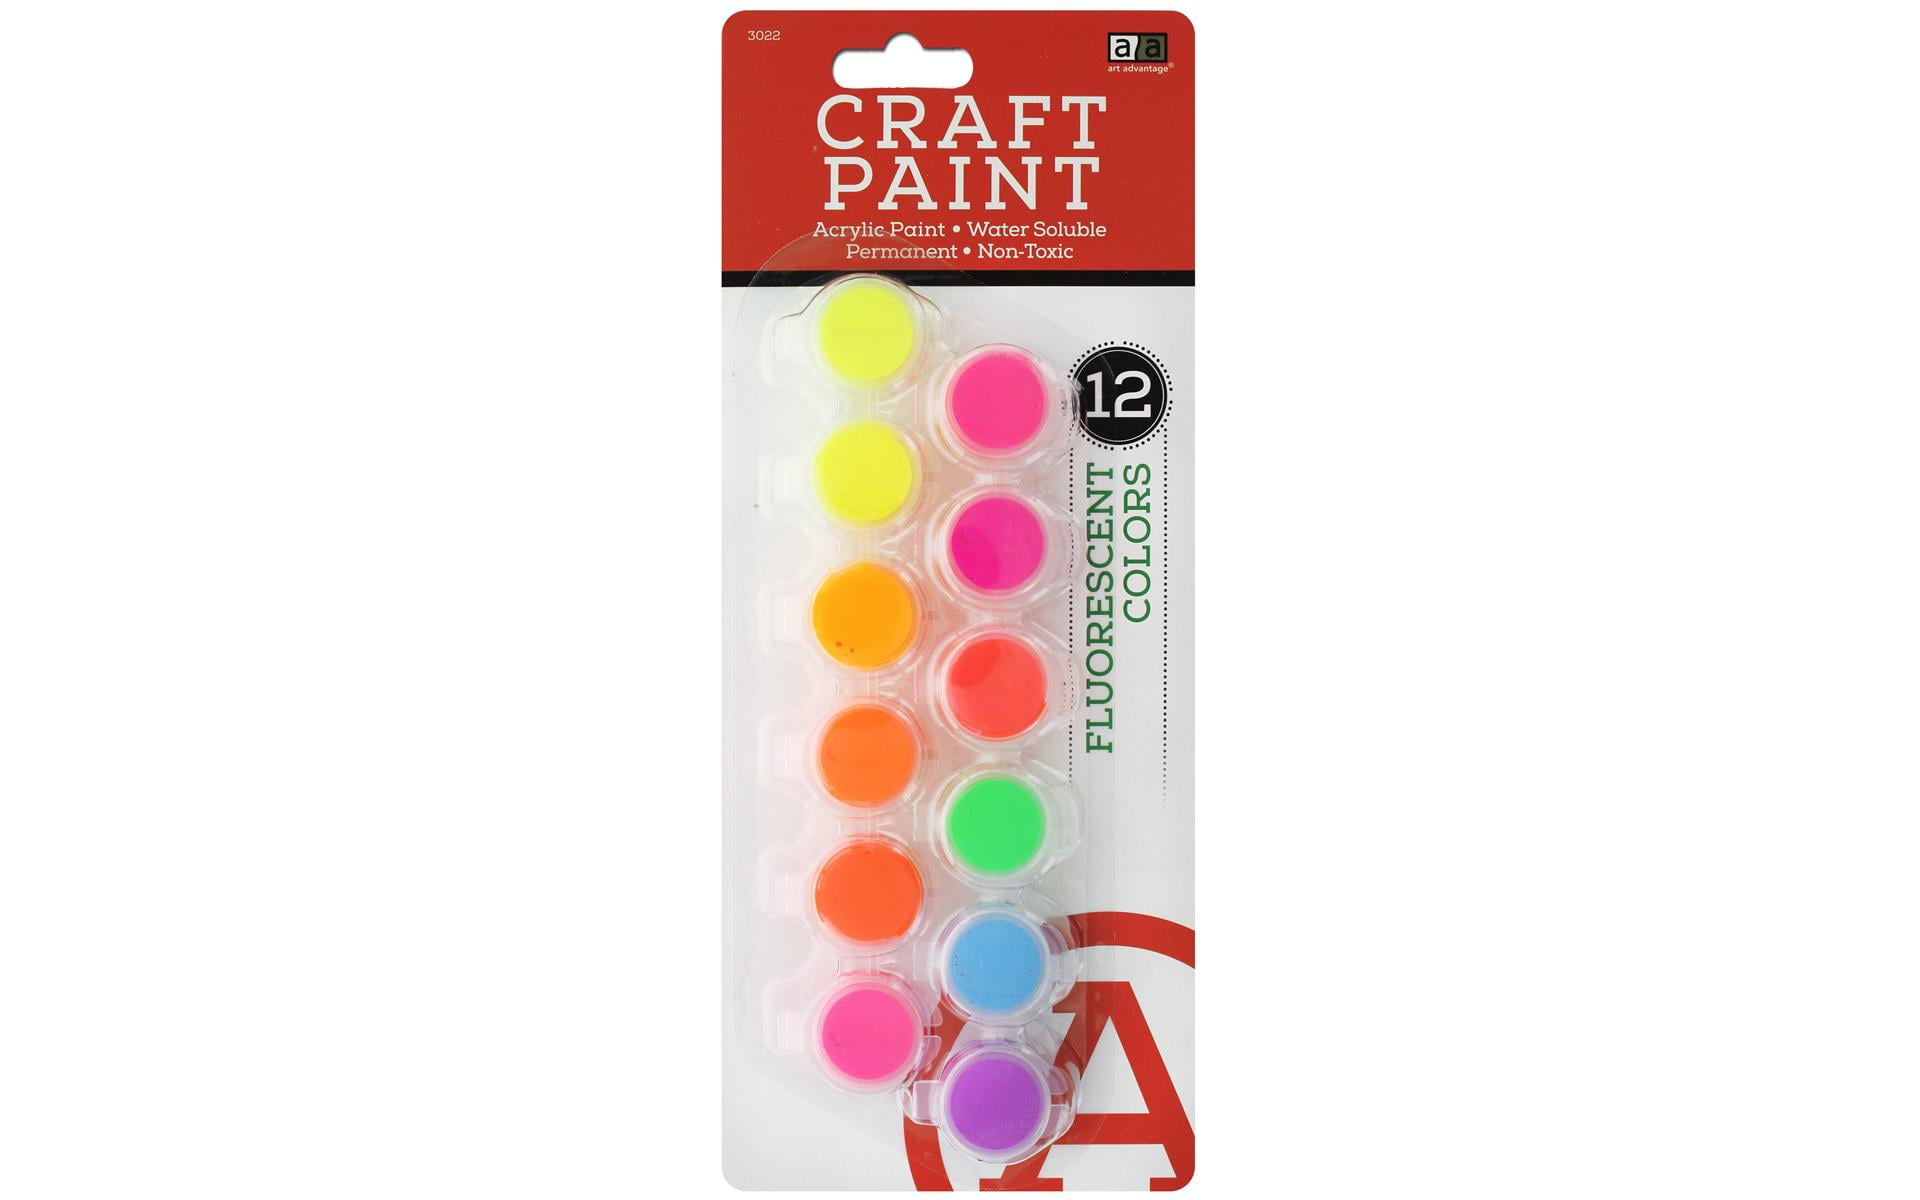  Acrylic Paint Pots for Kids, Classroom, Art and Crafts